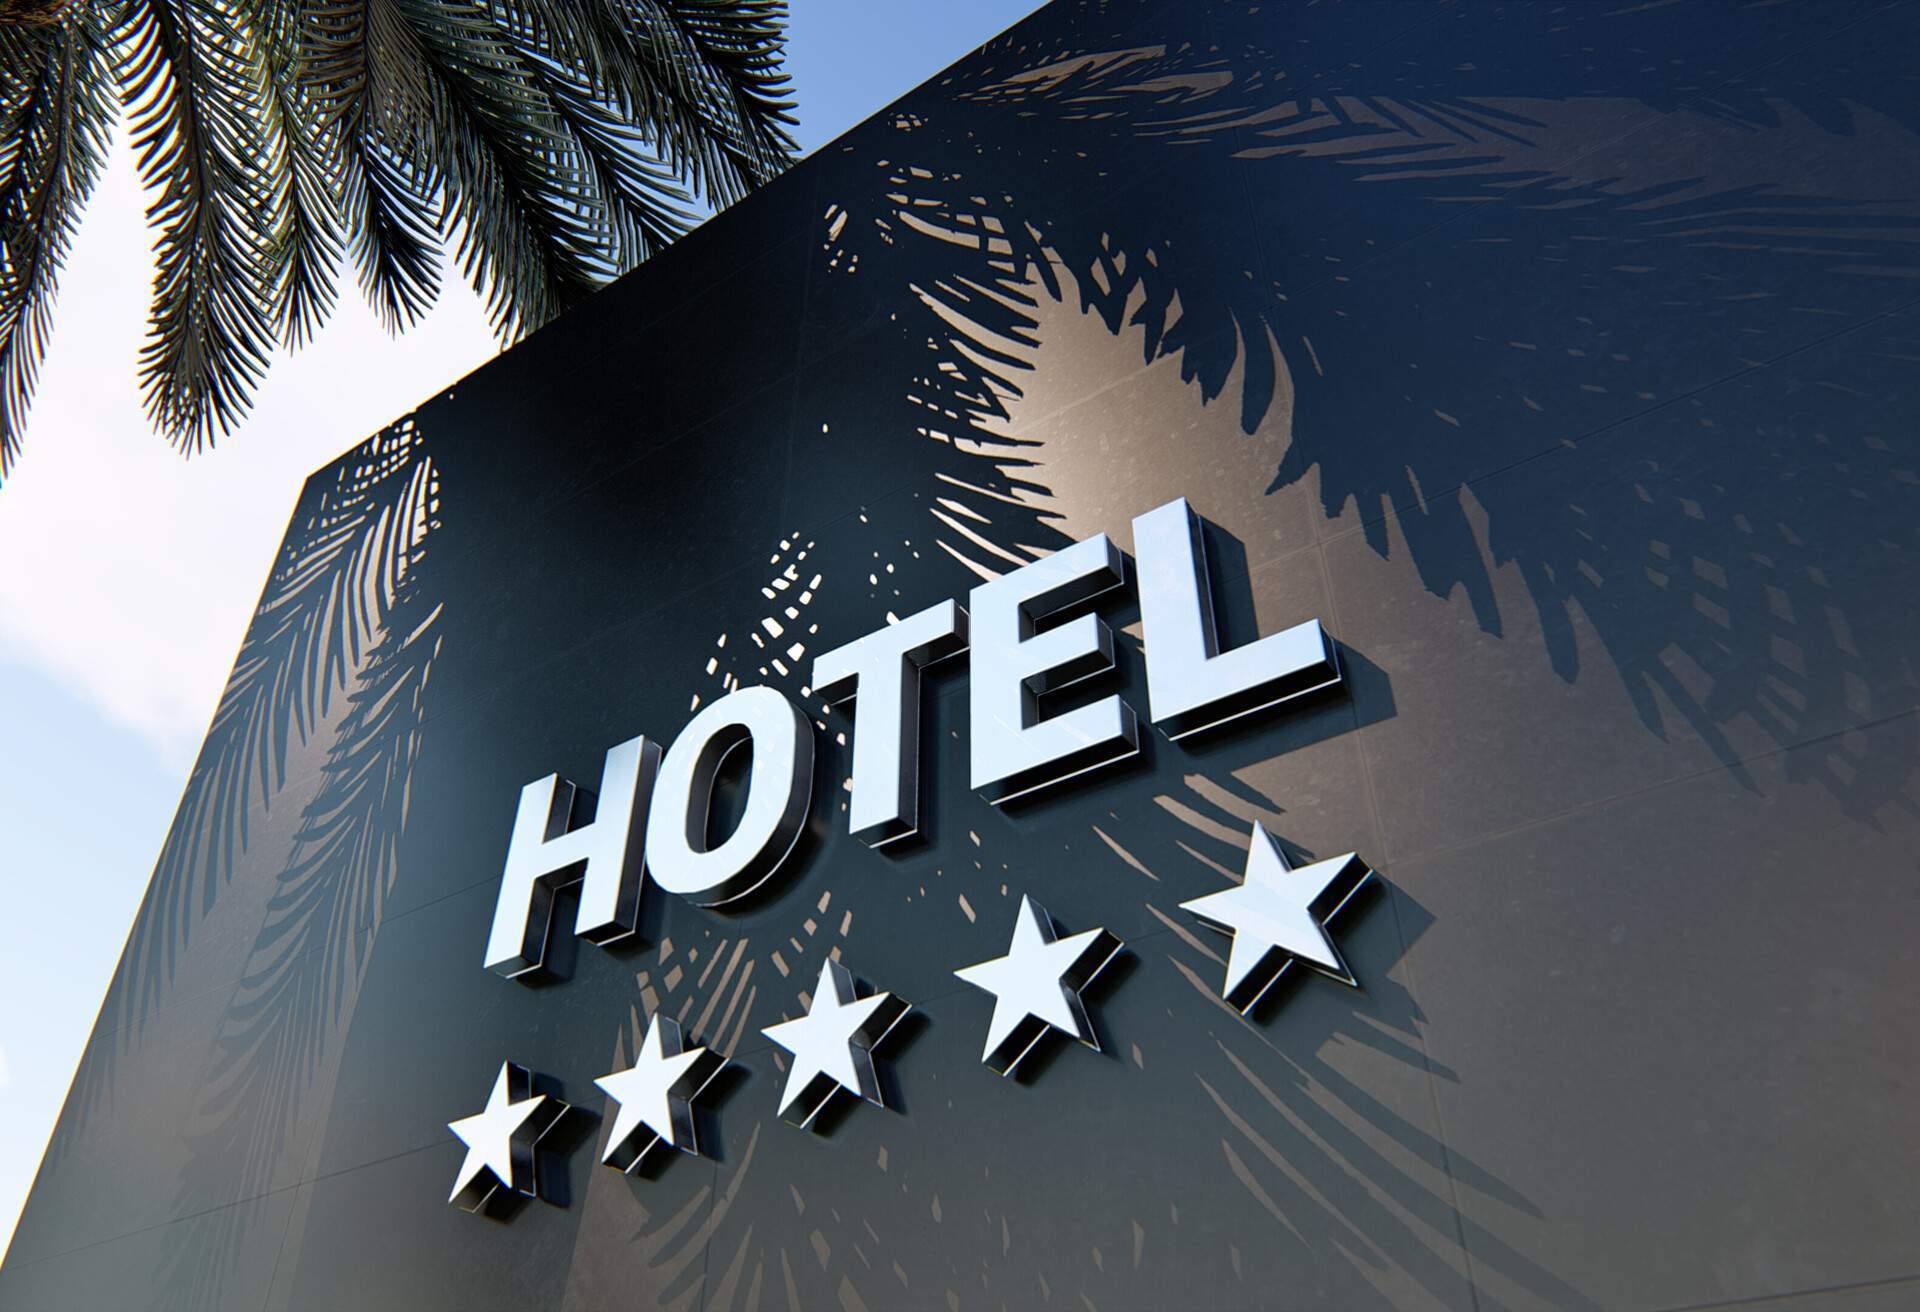 THEME_HOTEL_SIGN_FIVE_STARS_FACADE_BUILDING_GettyImages-1320779330-3.jpg